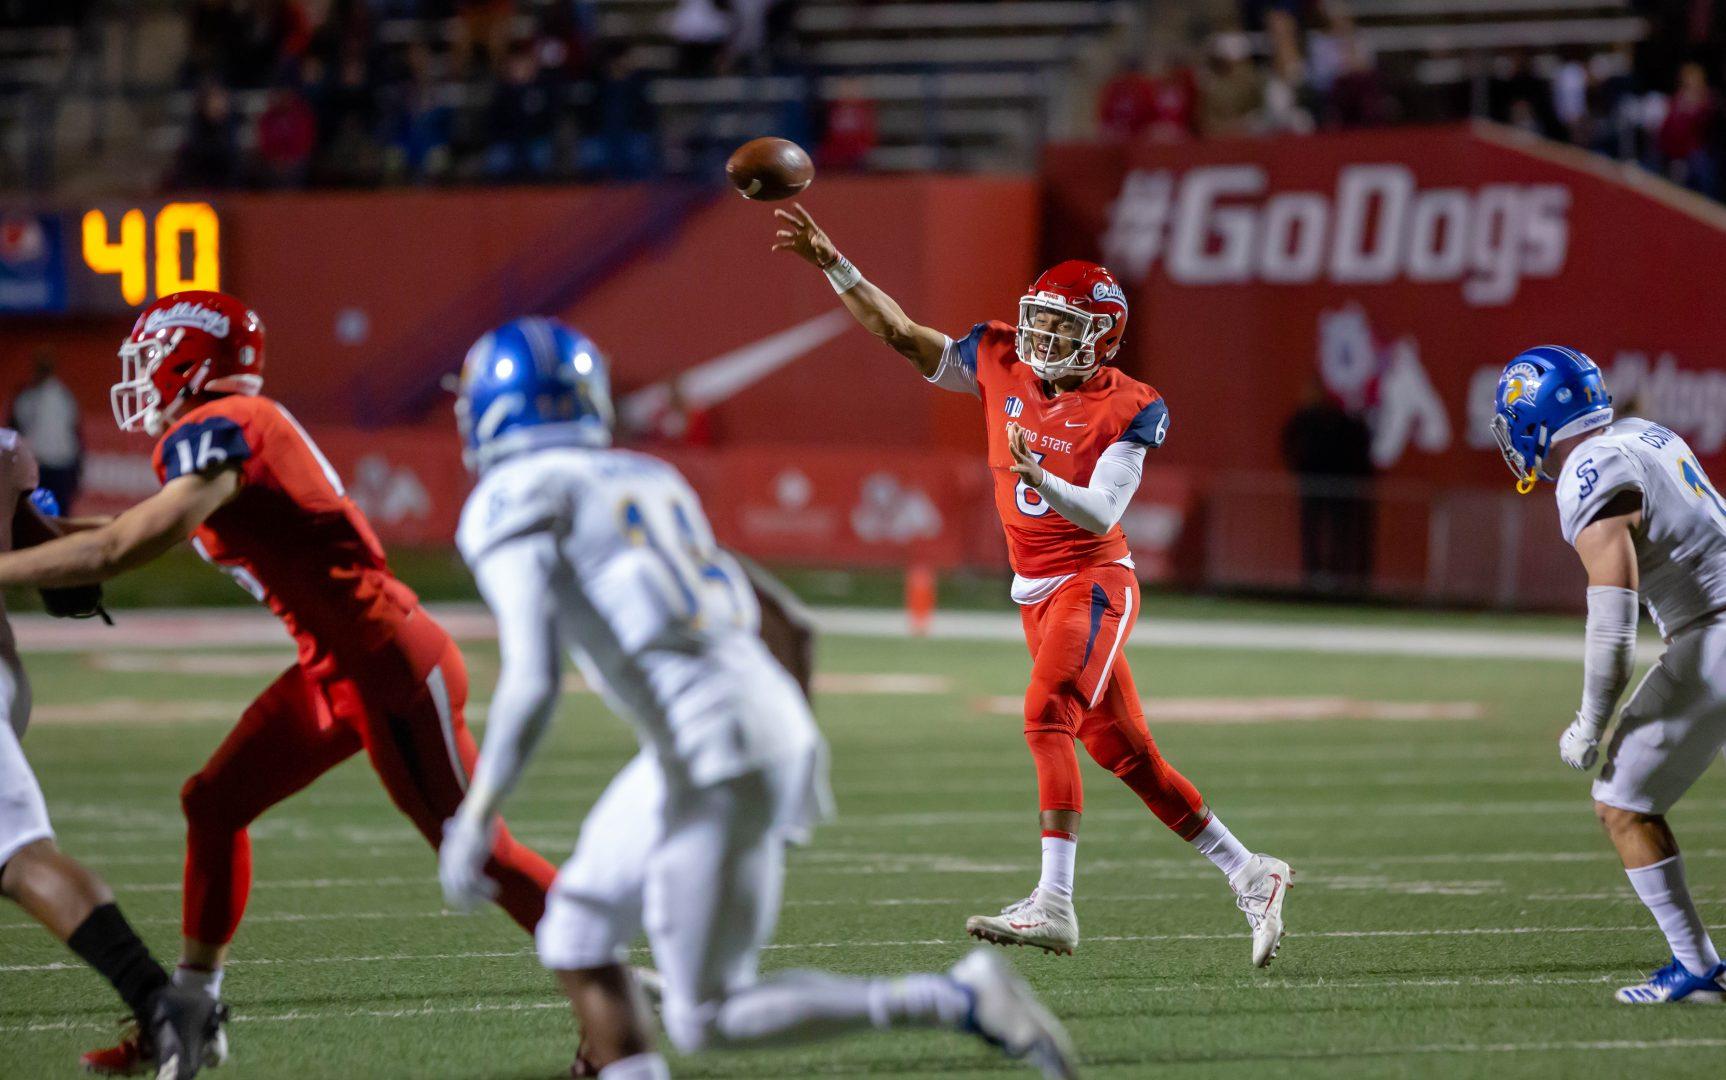 Fresno State senior quarterback Marcus McMaryion throws for his second touchdown pass of the game in the Bulldogs’ victory over San Jose State on Nov. 24, 2018. (Jose Romo/ The Collegian)